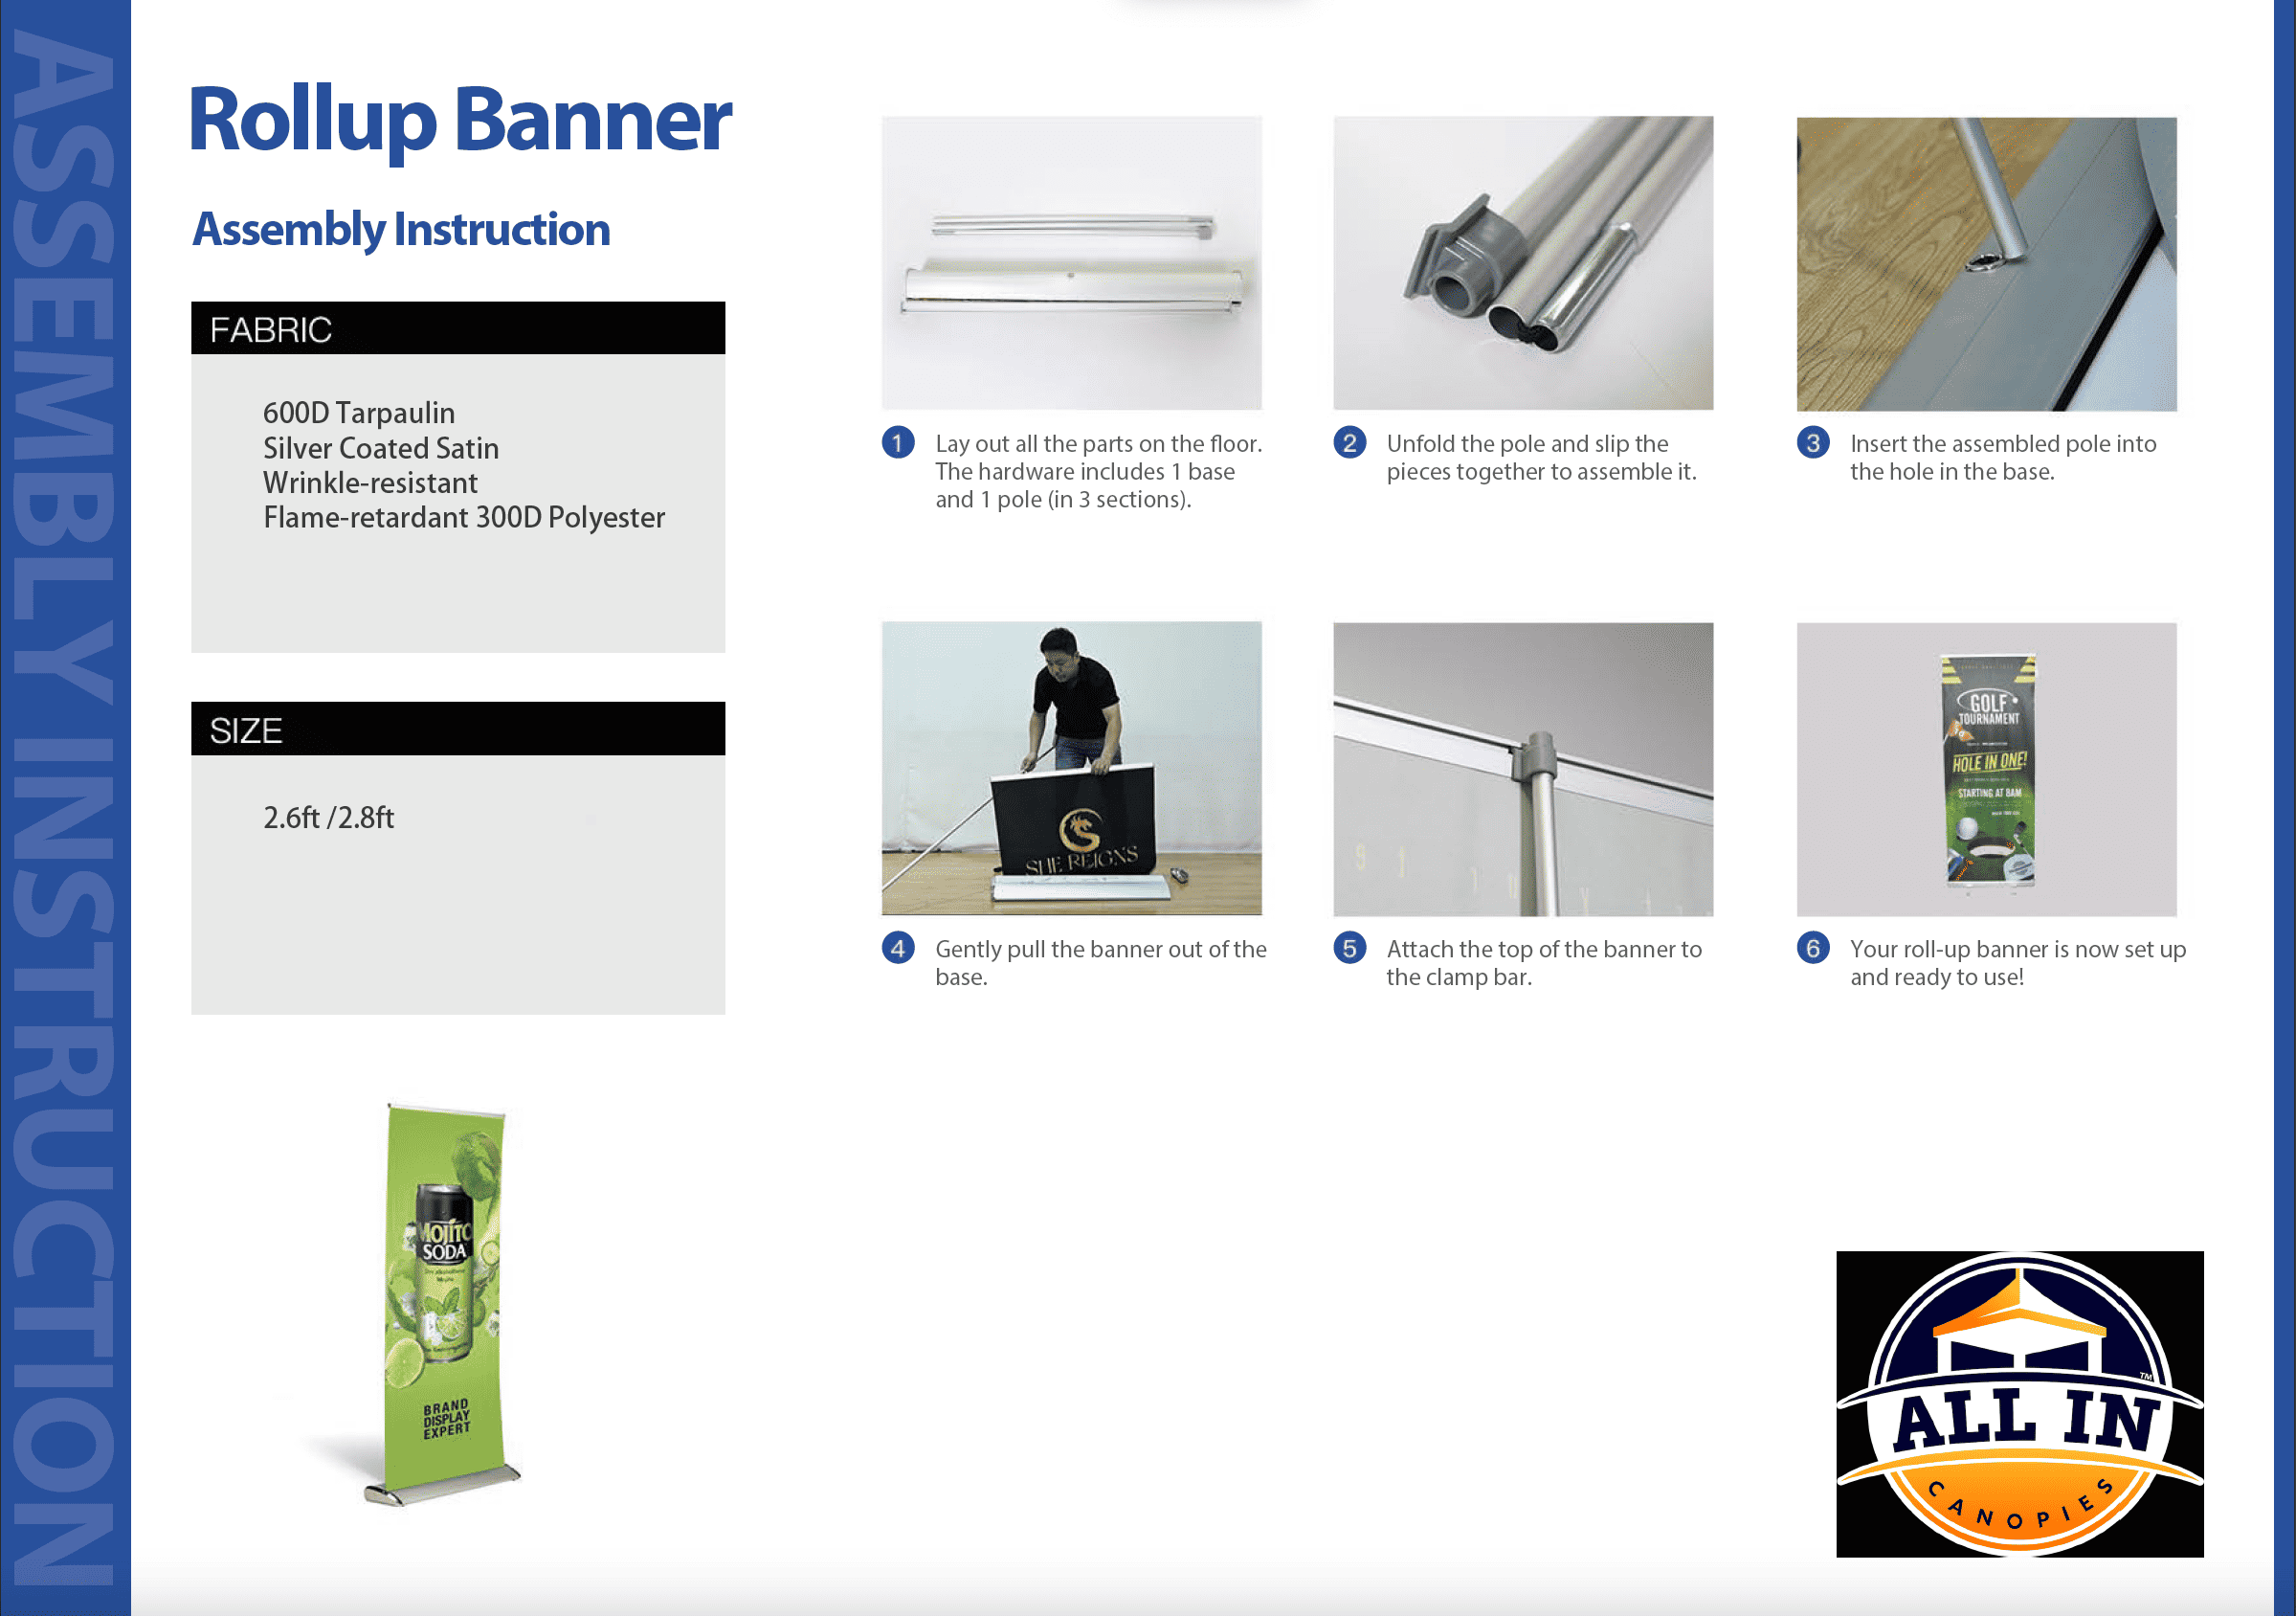 Pop-Up Stand Installation Guide